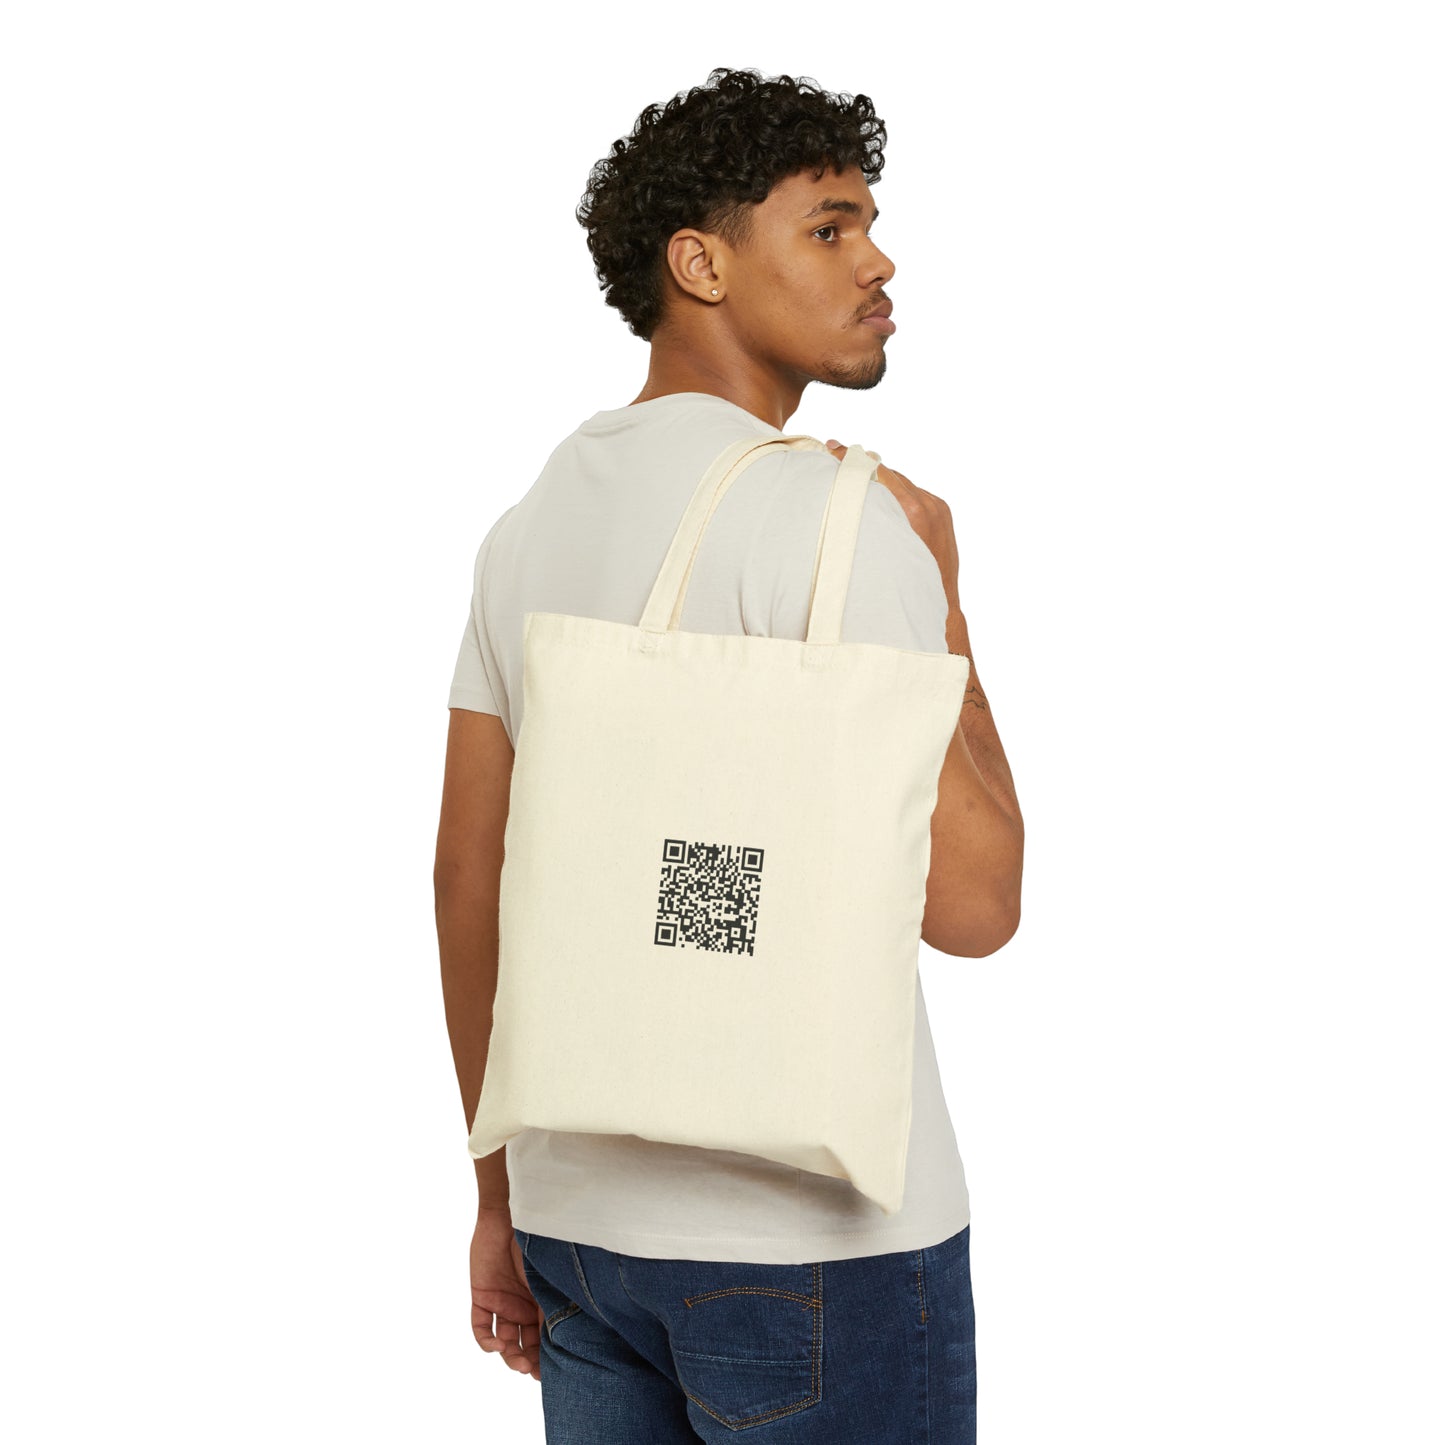 Only In Darkness - Cotton Canvas Tote Bag